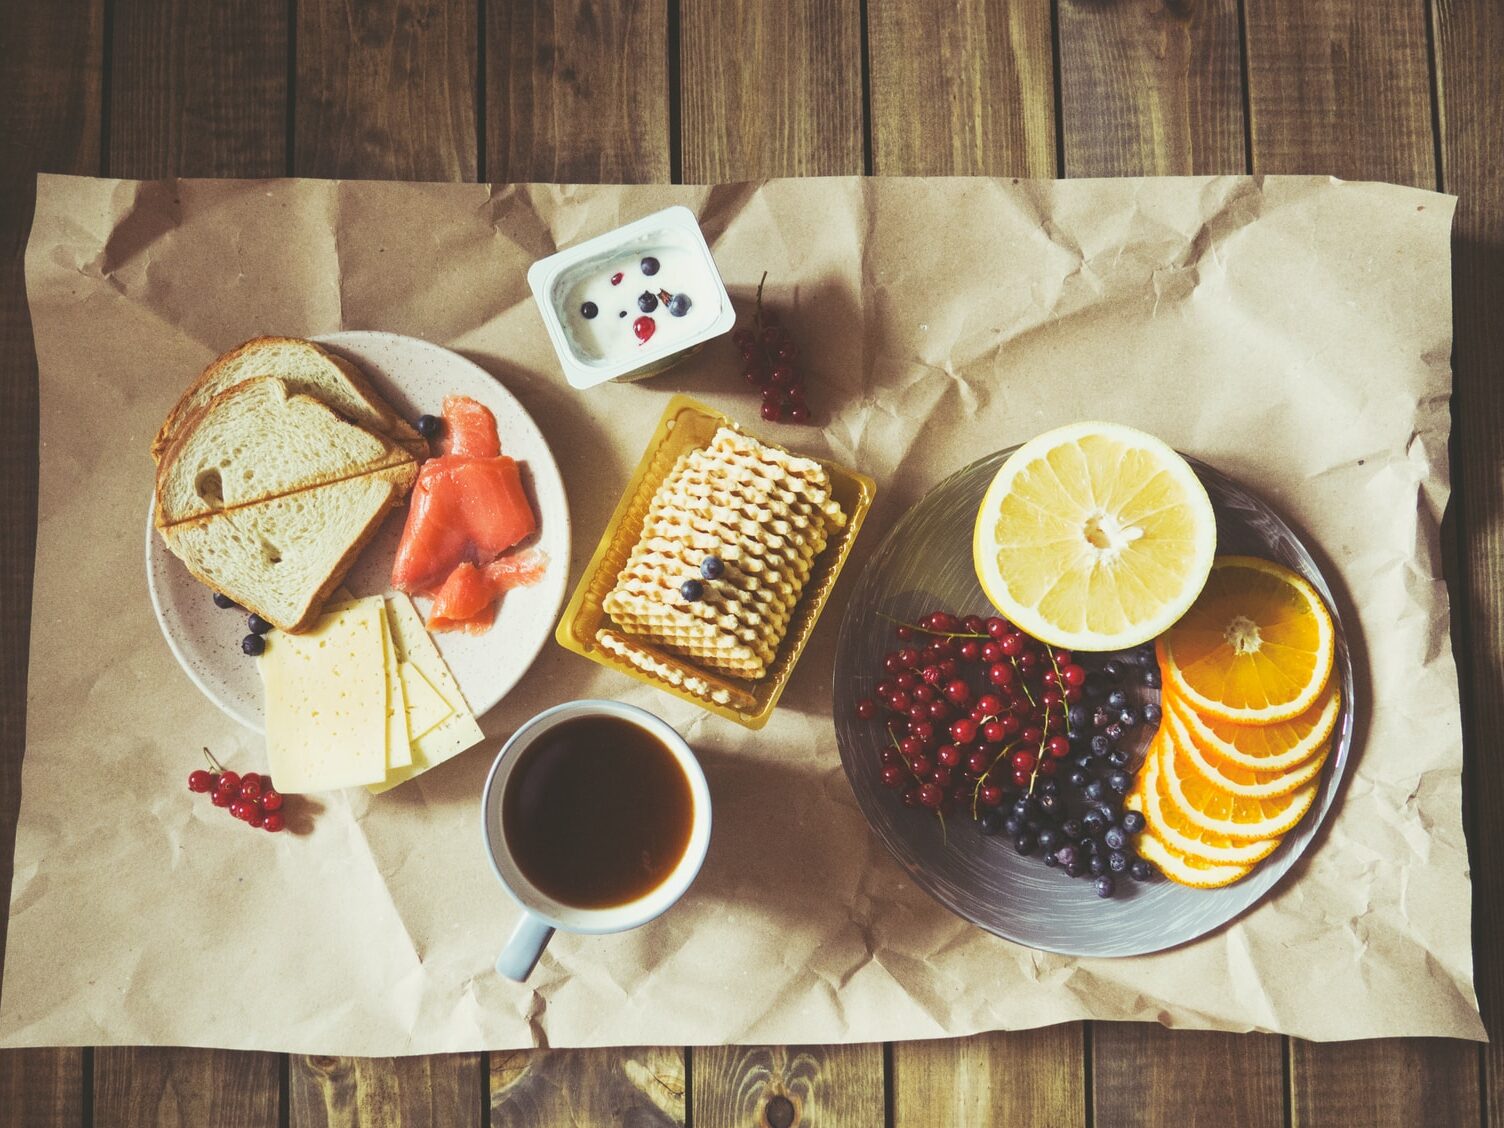 bread and fruits on plate